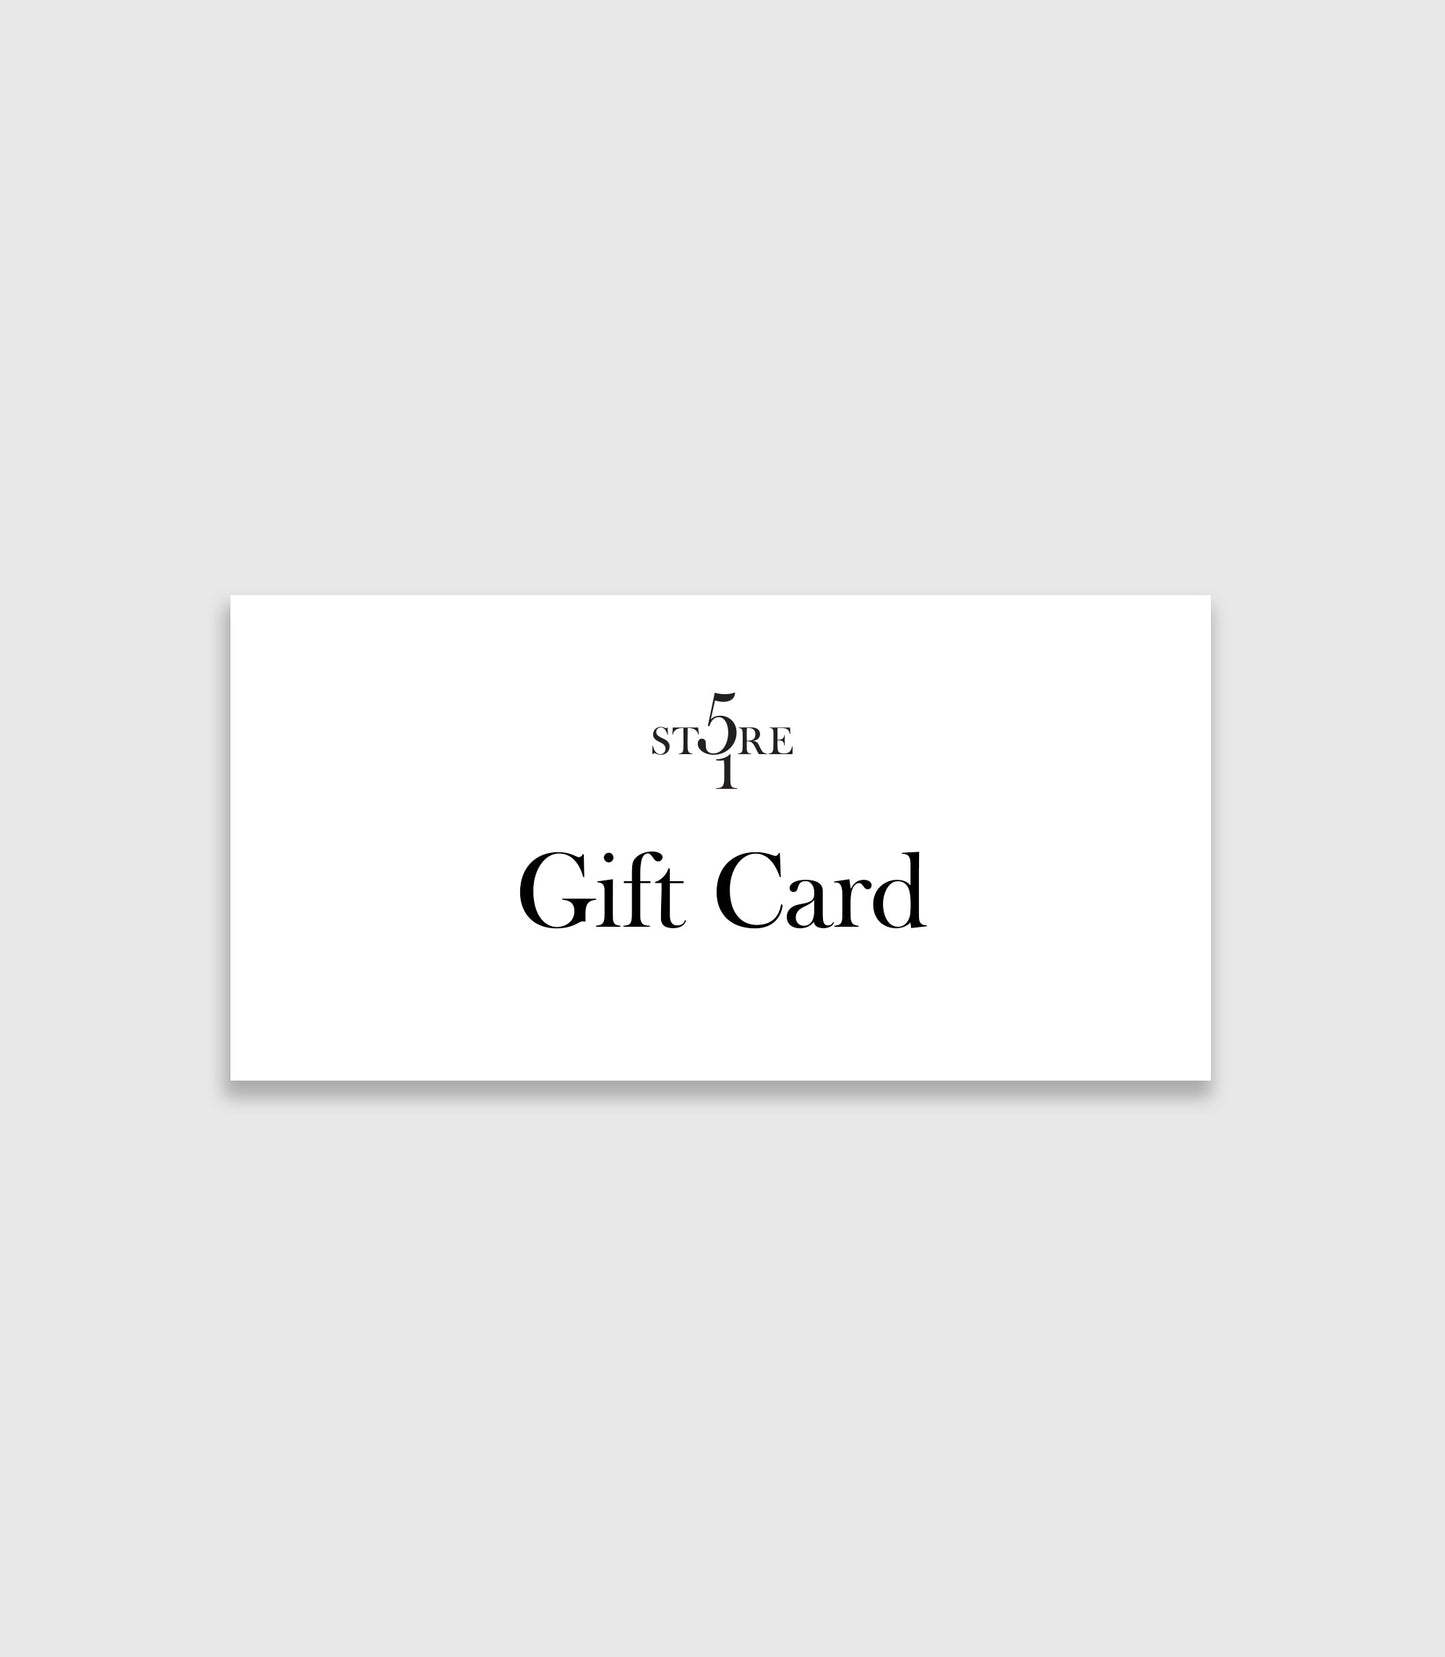 Store 51 GiftCard